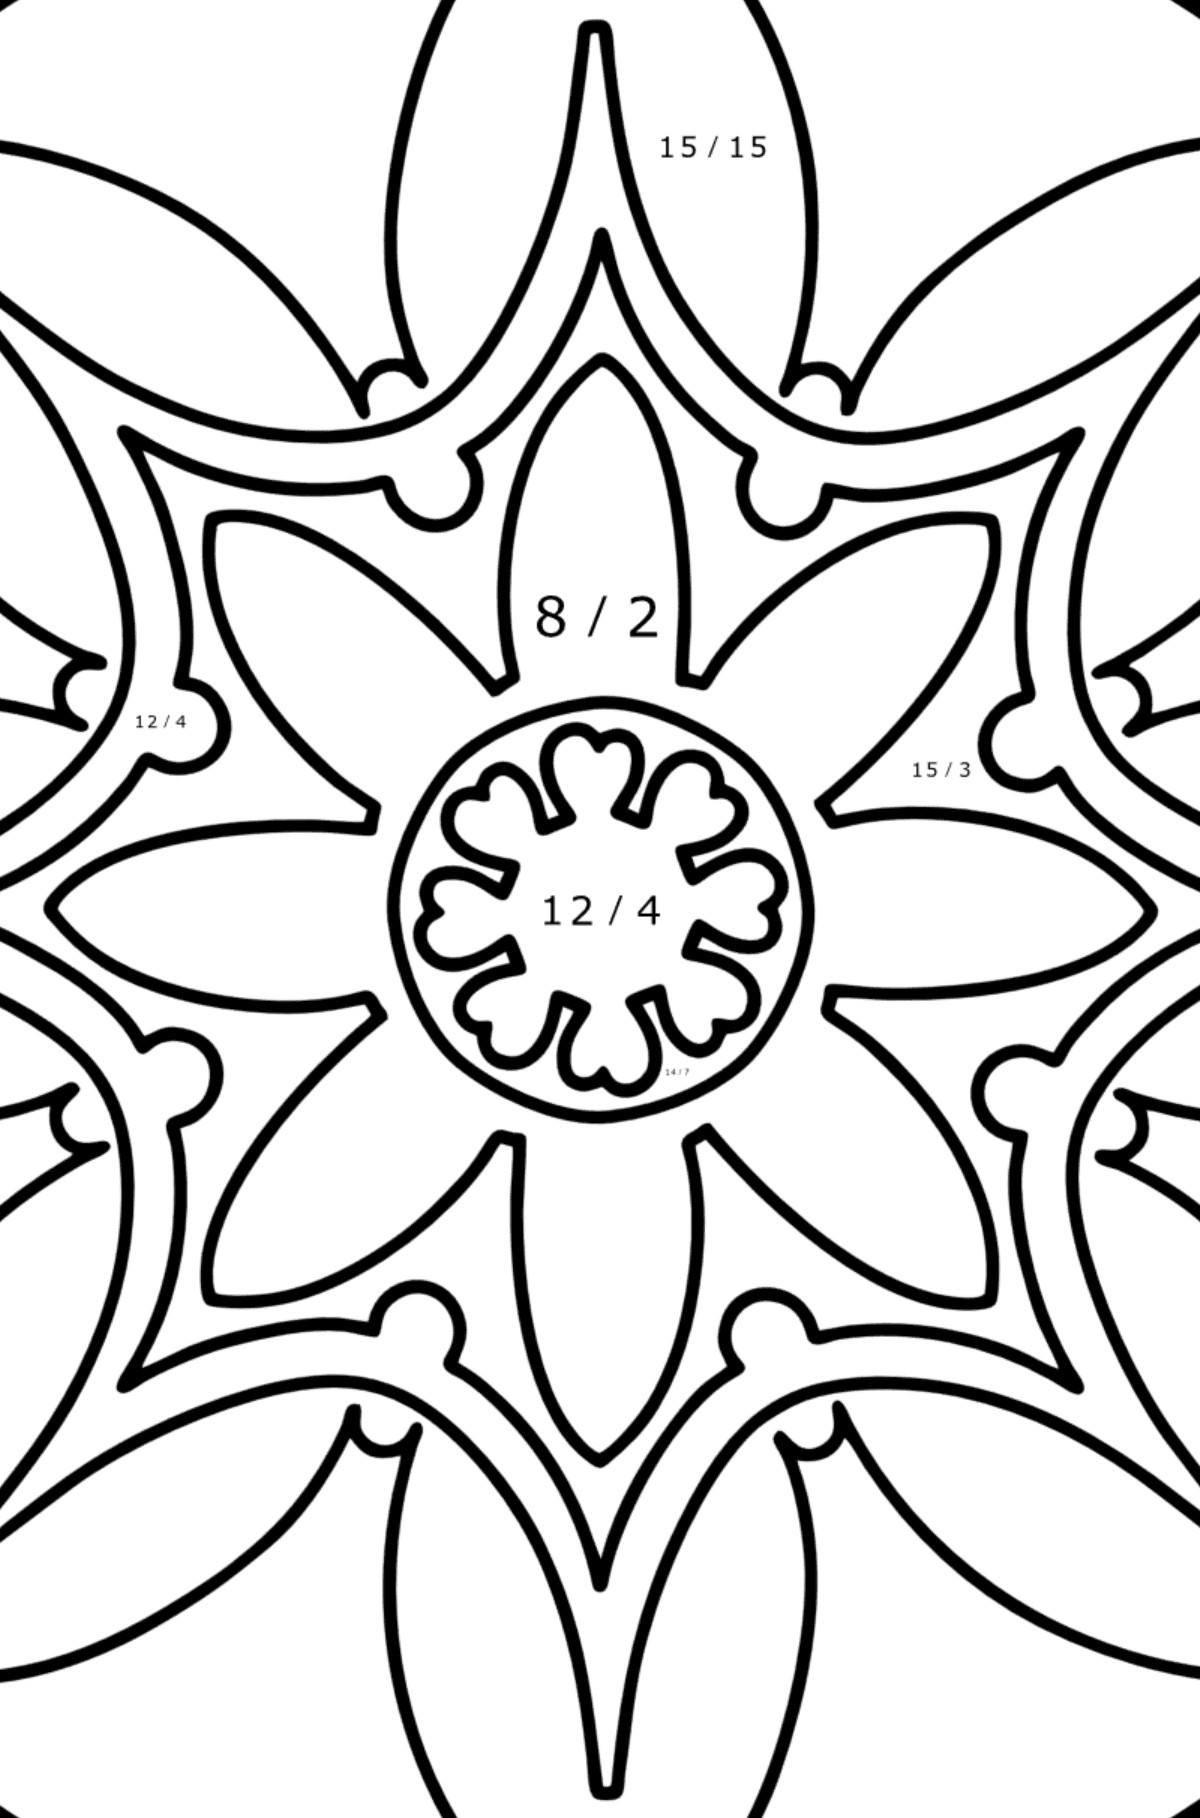 Mandala coloring page - 7 elements - Math Coloring - Division for Kids